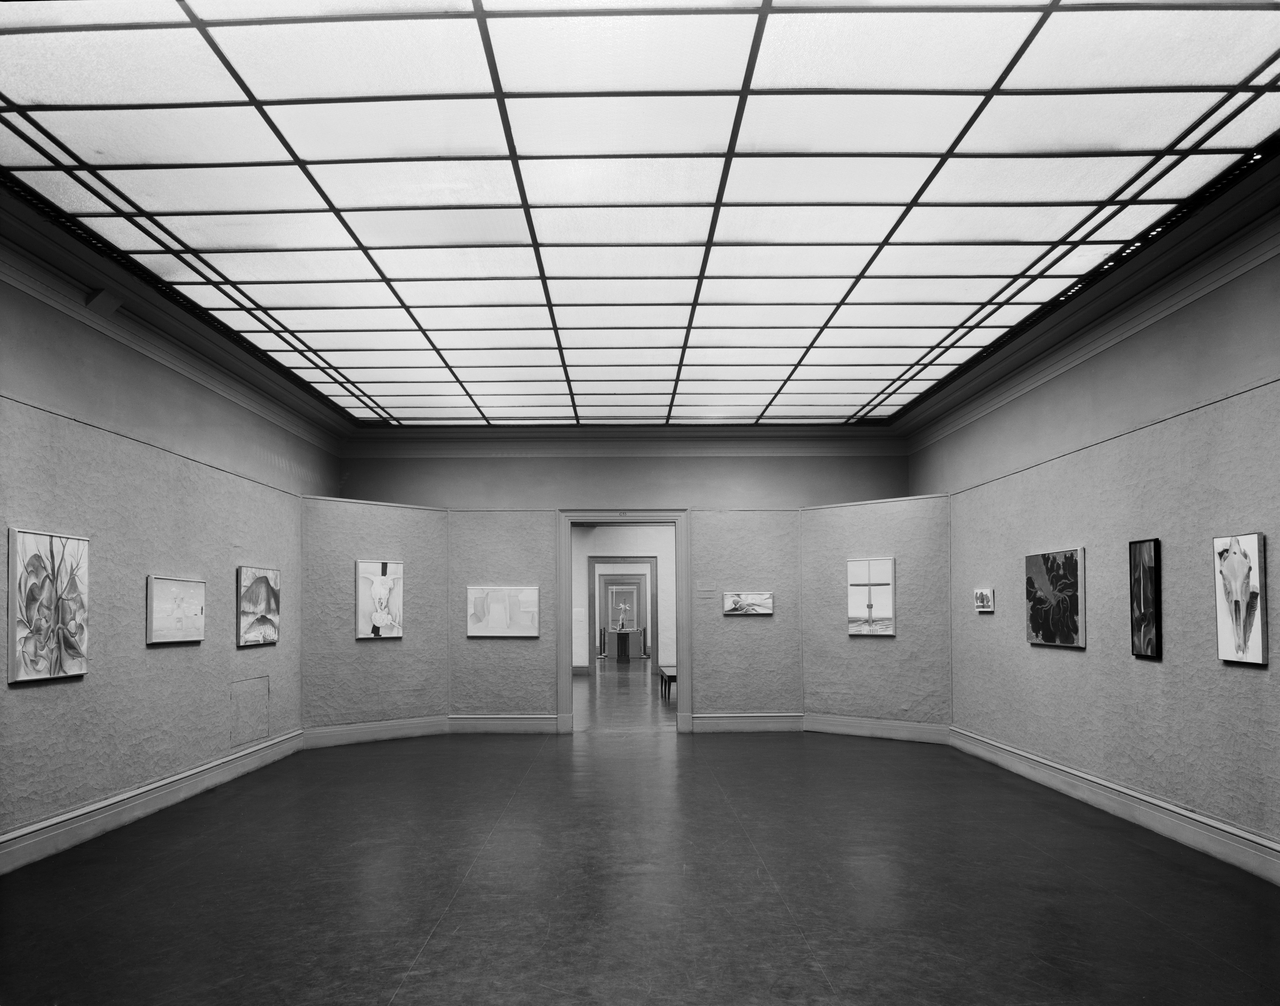 Black and white photograph. This room has an opening at the far end, and walls angle inward across the corners to either side of it. Ten paintings are hung along a textured wall that appears gray in this photograph. The paintings show abstracted or stylized trees, mountains, skulls, or layered shapes. With the grid of lights above and the dark floor below, we look into at least three more rooms, barely visible to either side of the nested doorways.